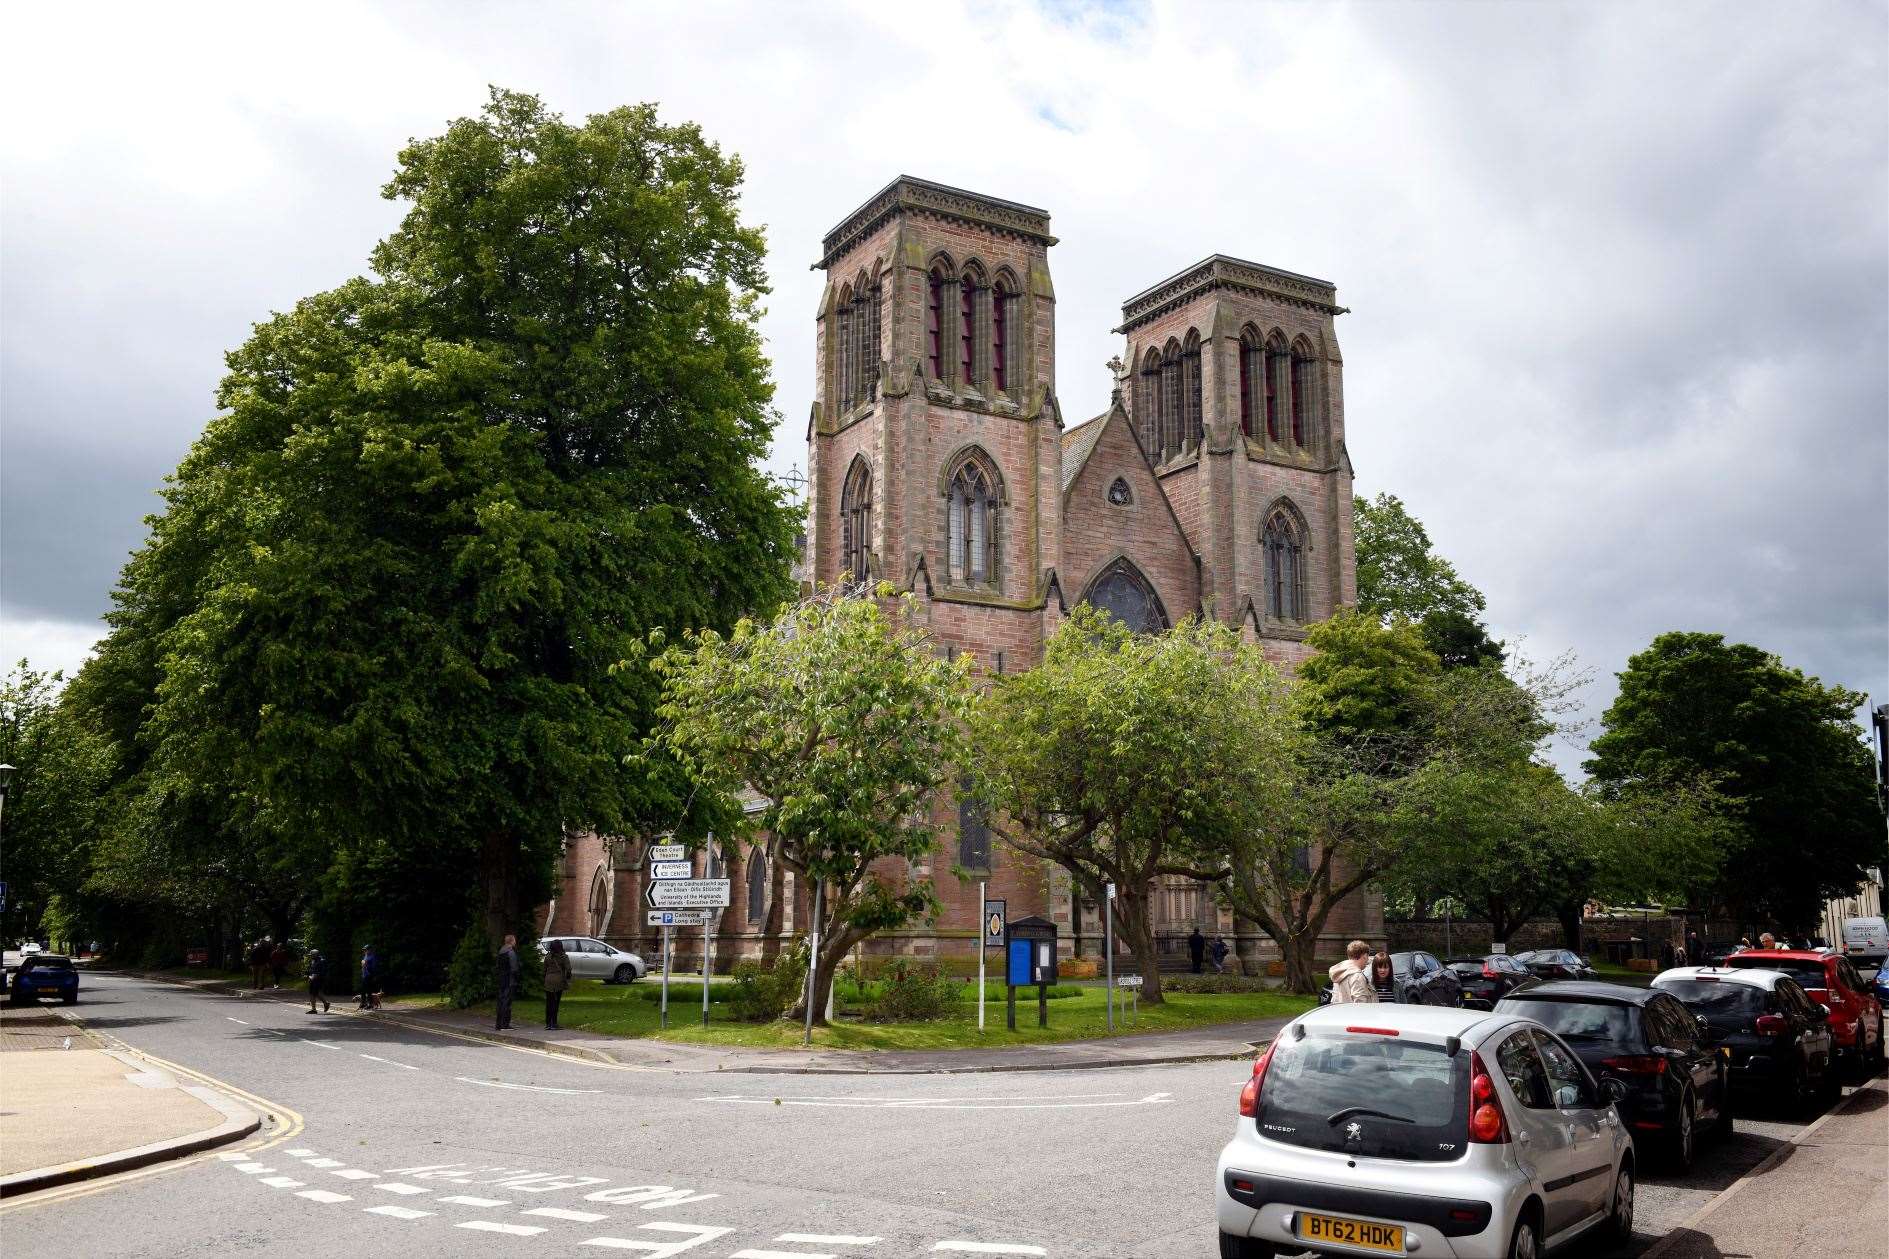 The café at Inverness Cathedral is a popular eatery.